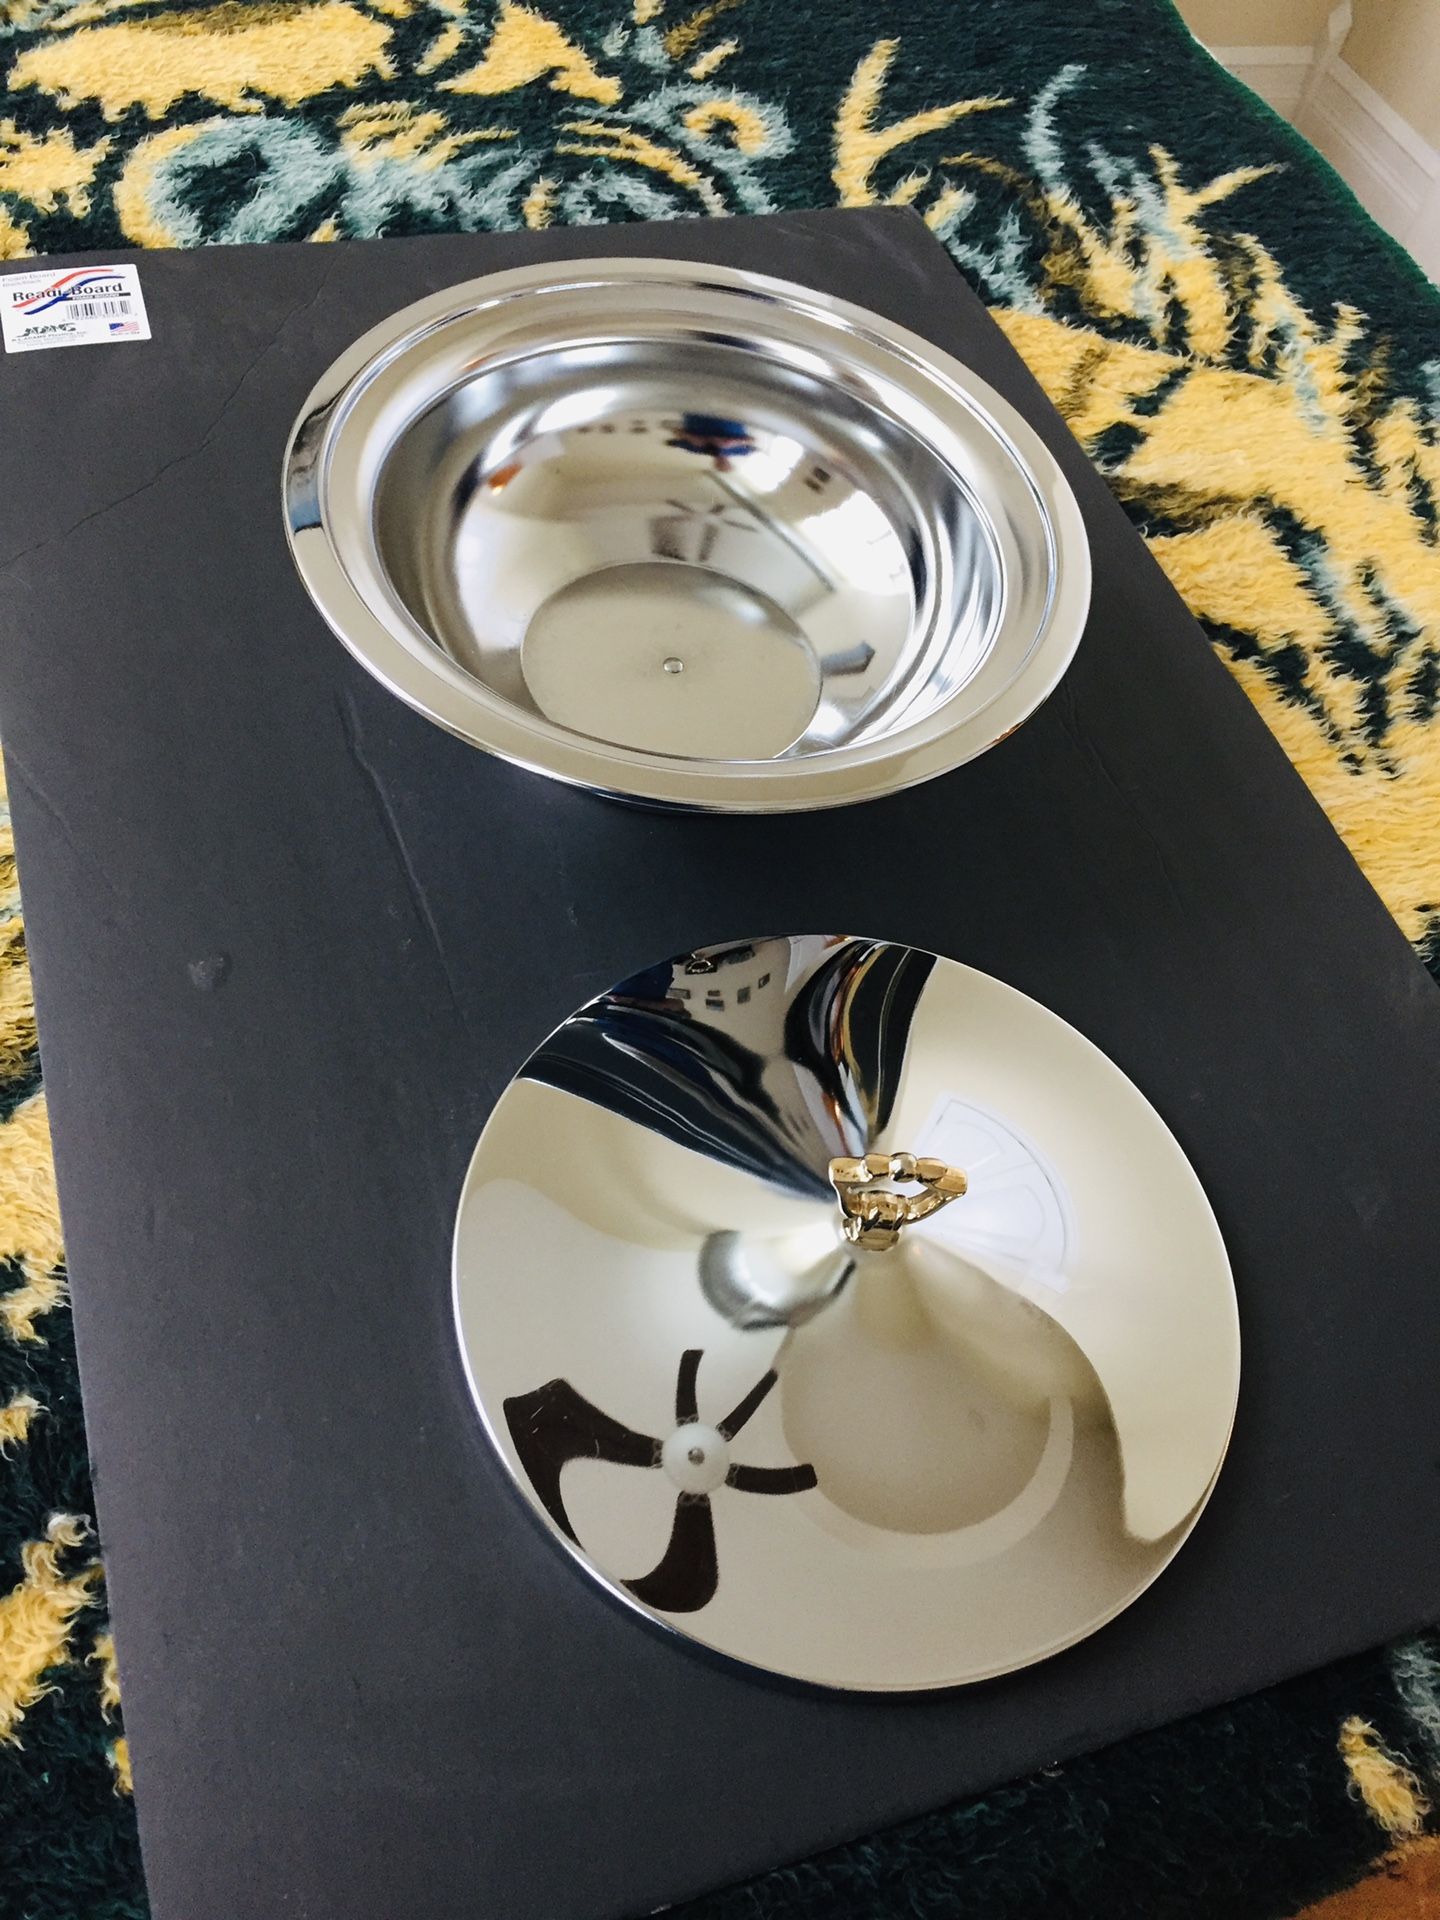 Vintage Antique. Round metal bowl with lid. Like new condition. Diameter: 11.5”.  Hight: 4” with no lid on. Hight: 6.5” with lid on - up to the top of